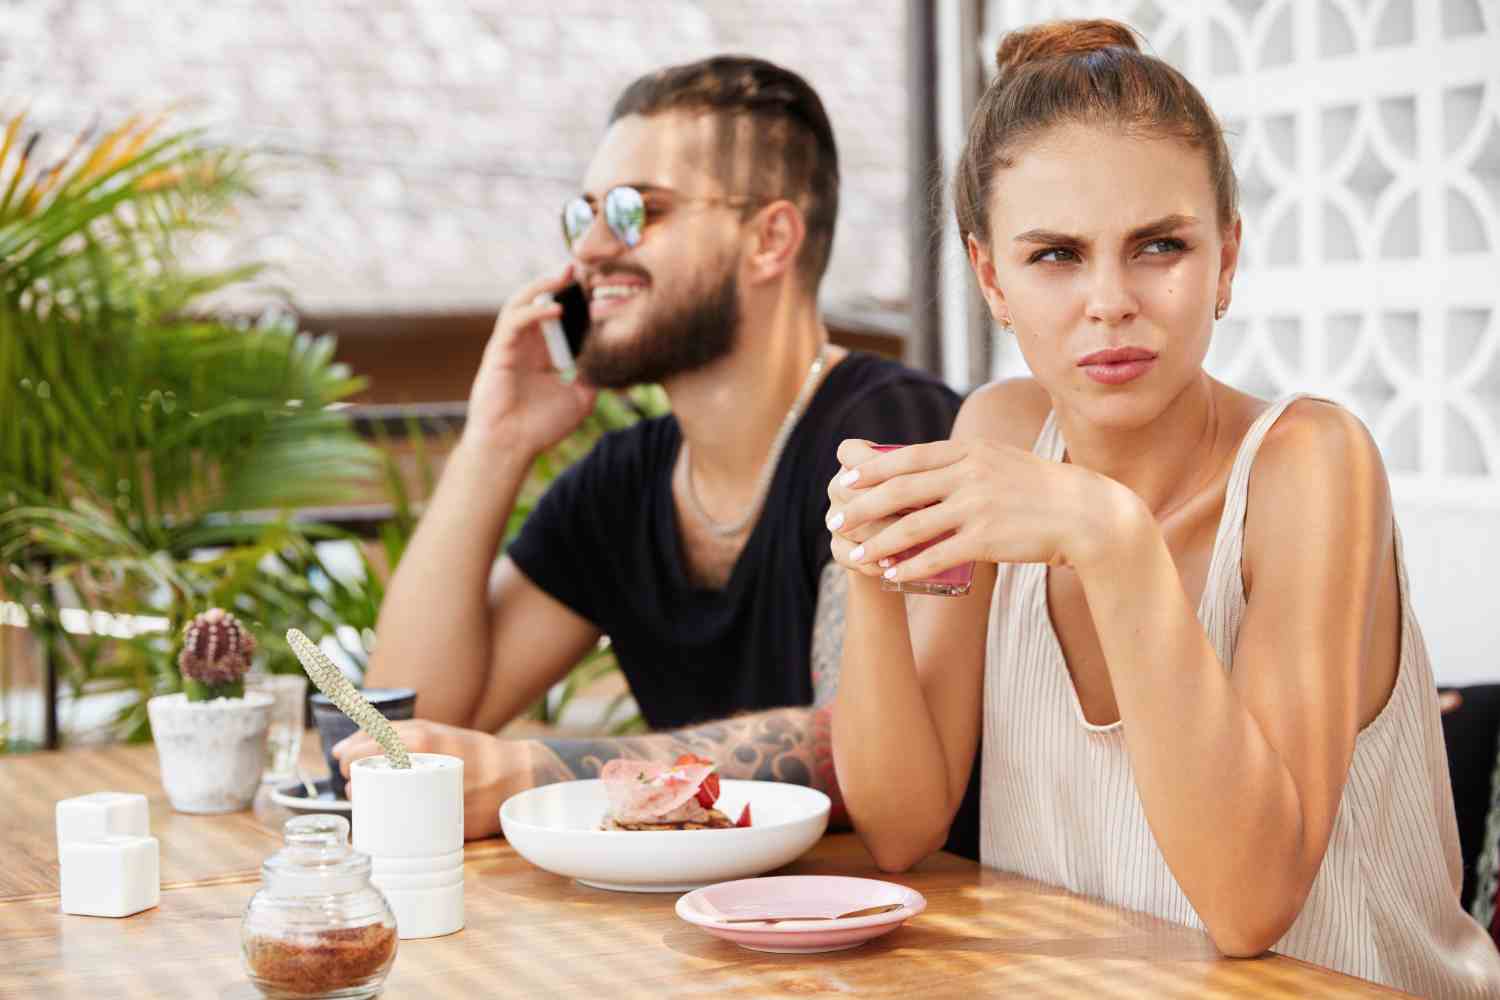 7 obvious signs he doesn't like you